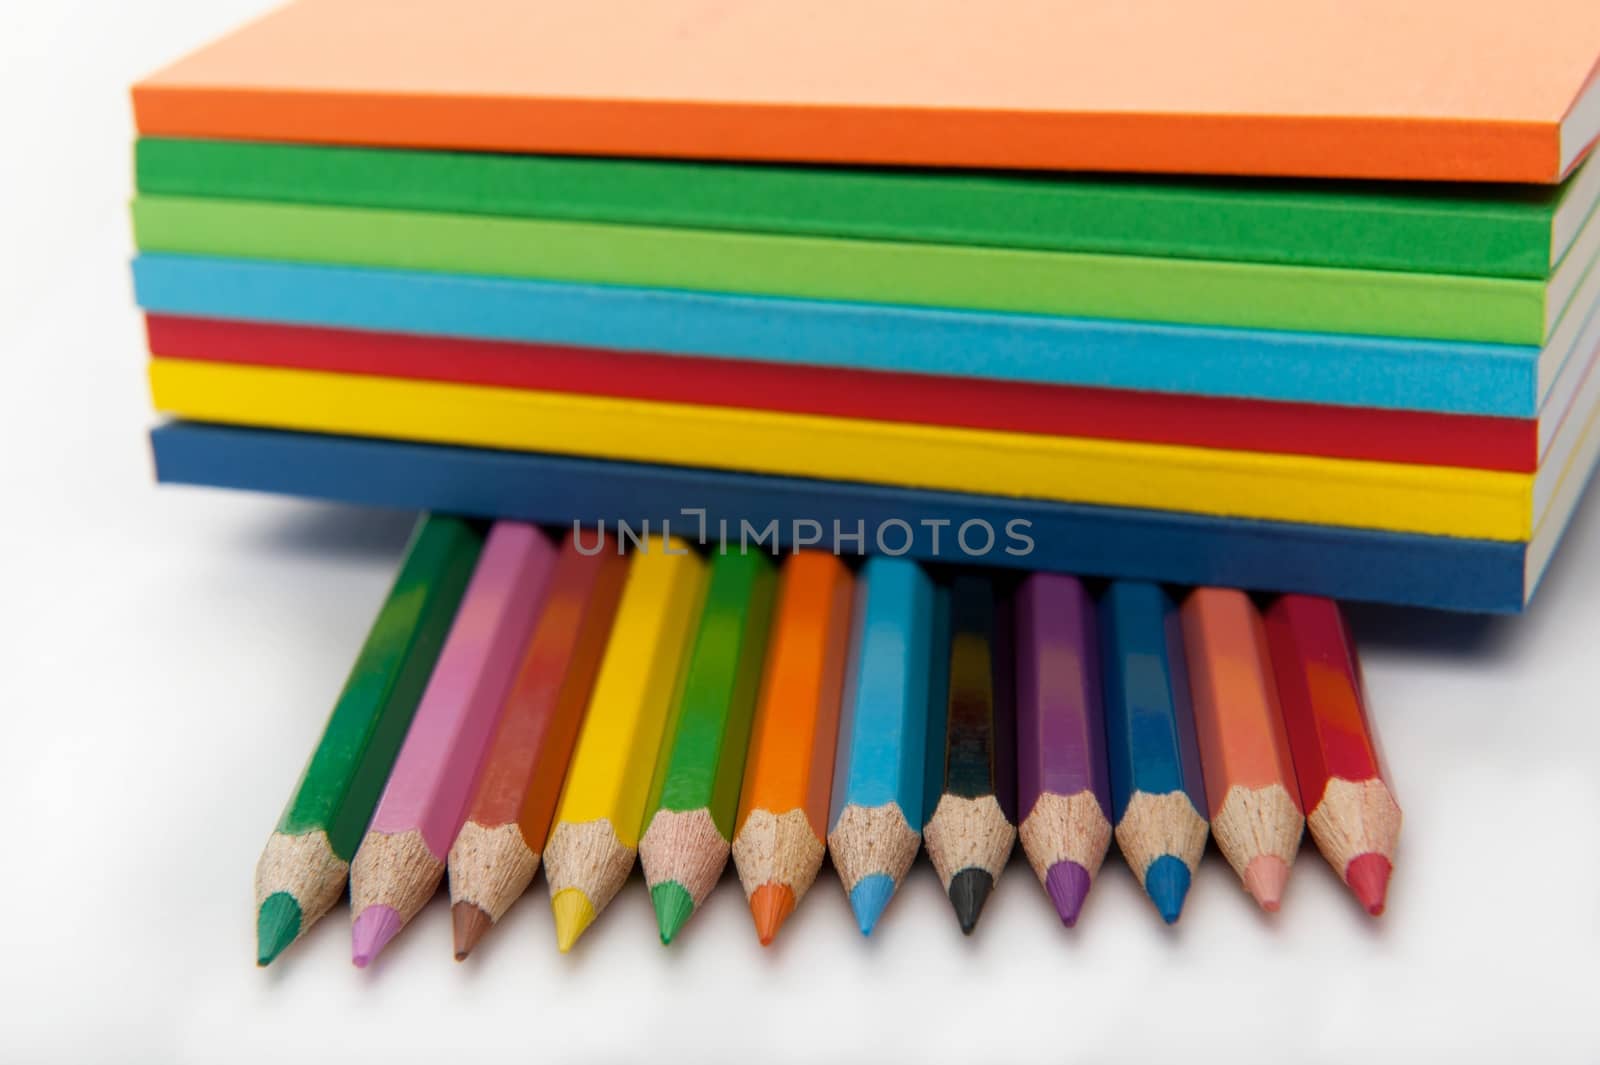 Isolated on the white background horizontal shot of seven notepads put on top of twelve colored pencils